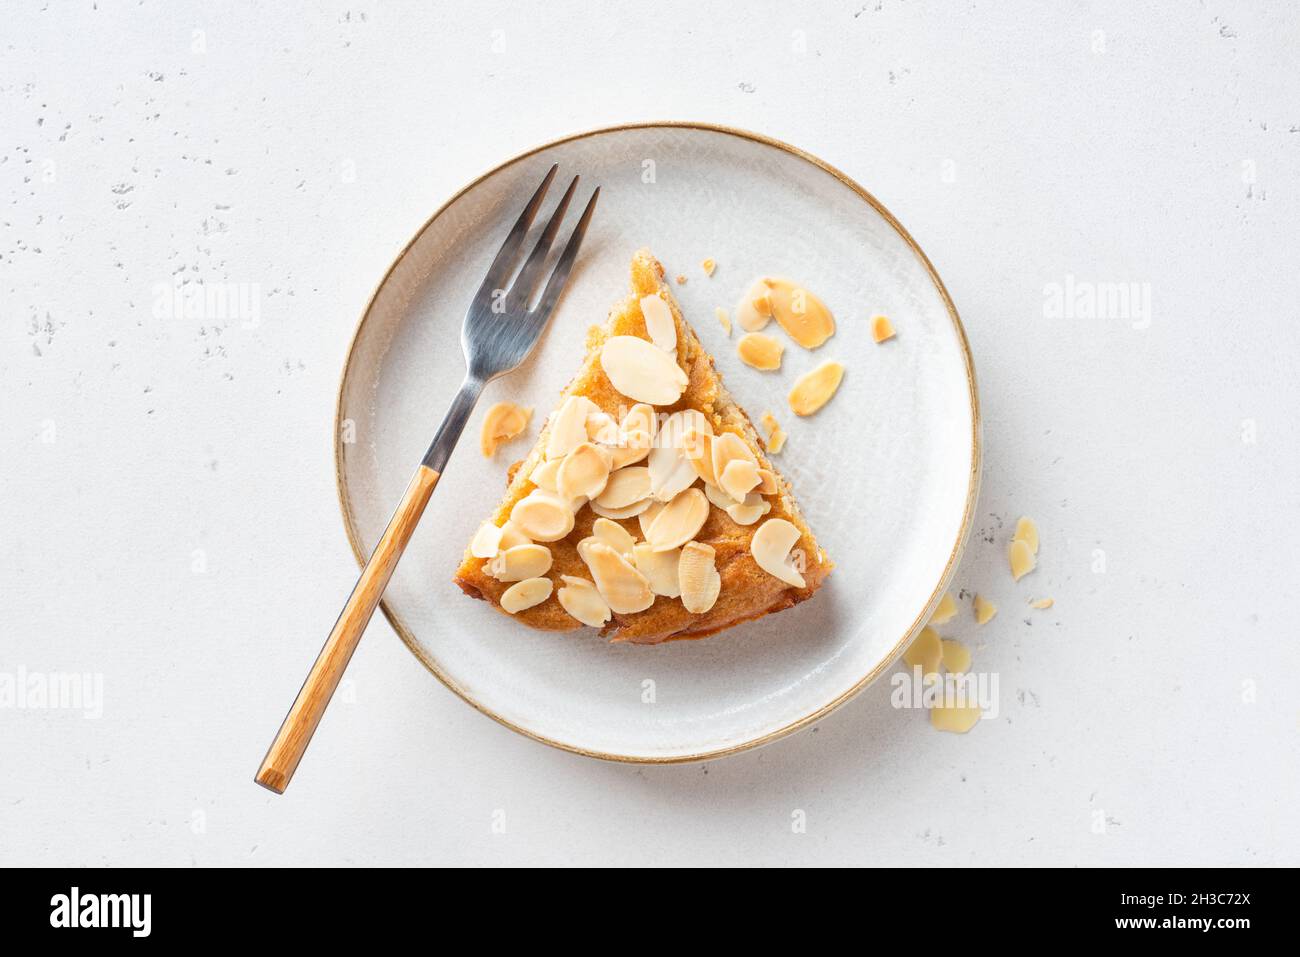 Slice of delicious almond cake on a plate, top view, grey stone background Stock Photo